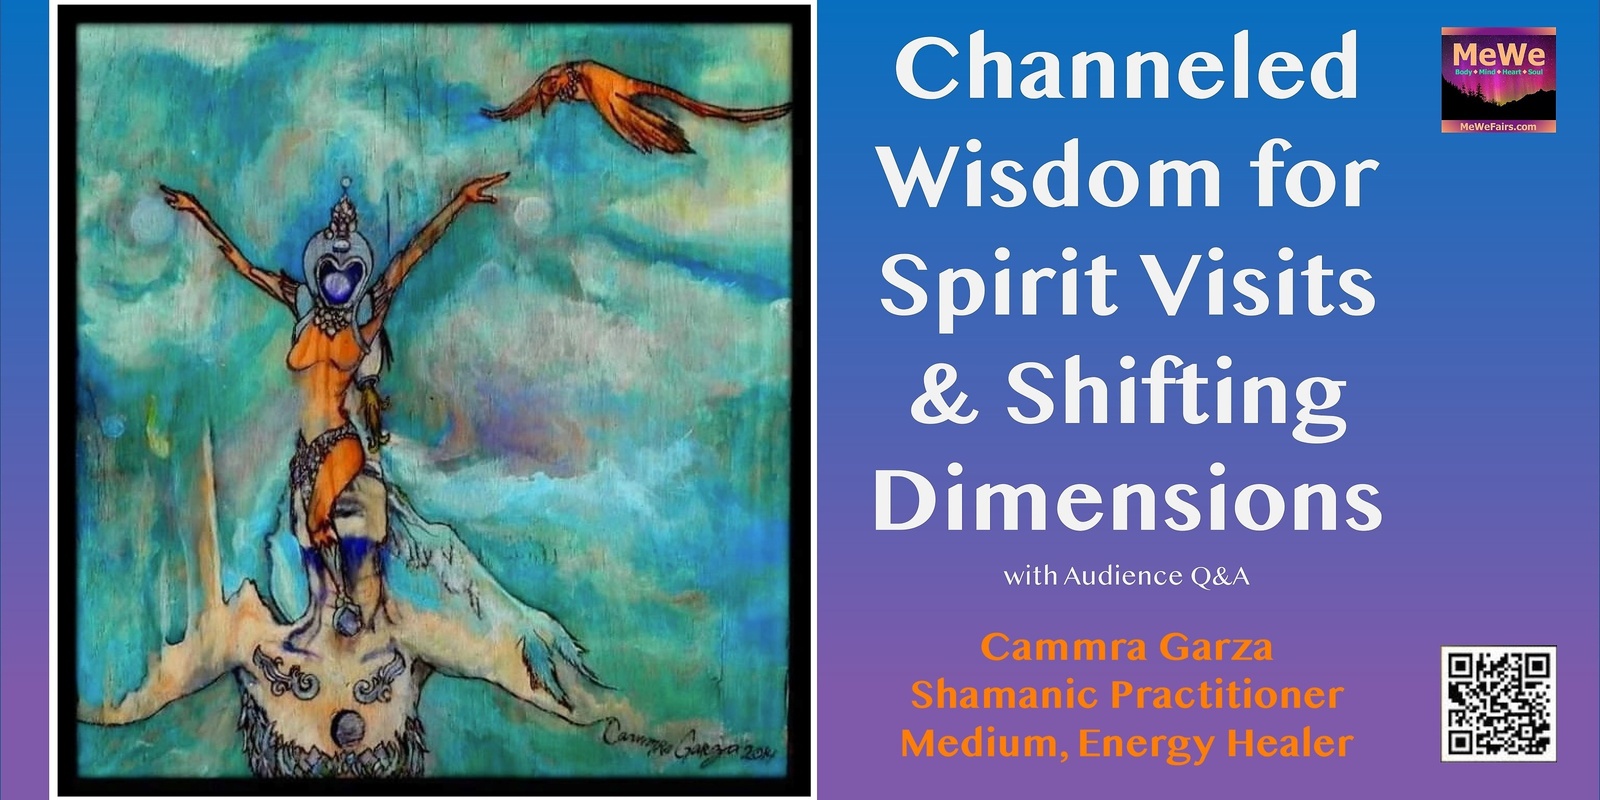 Banner image for Channeled Wisdom for Spirit Visits & Shifting Dimensions with Cammra Garza after the MeWe Fair + Gem Show in Eugene